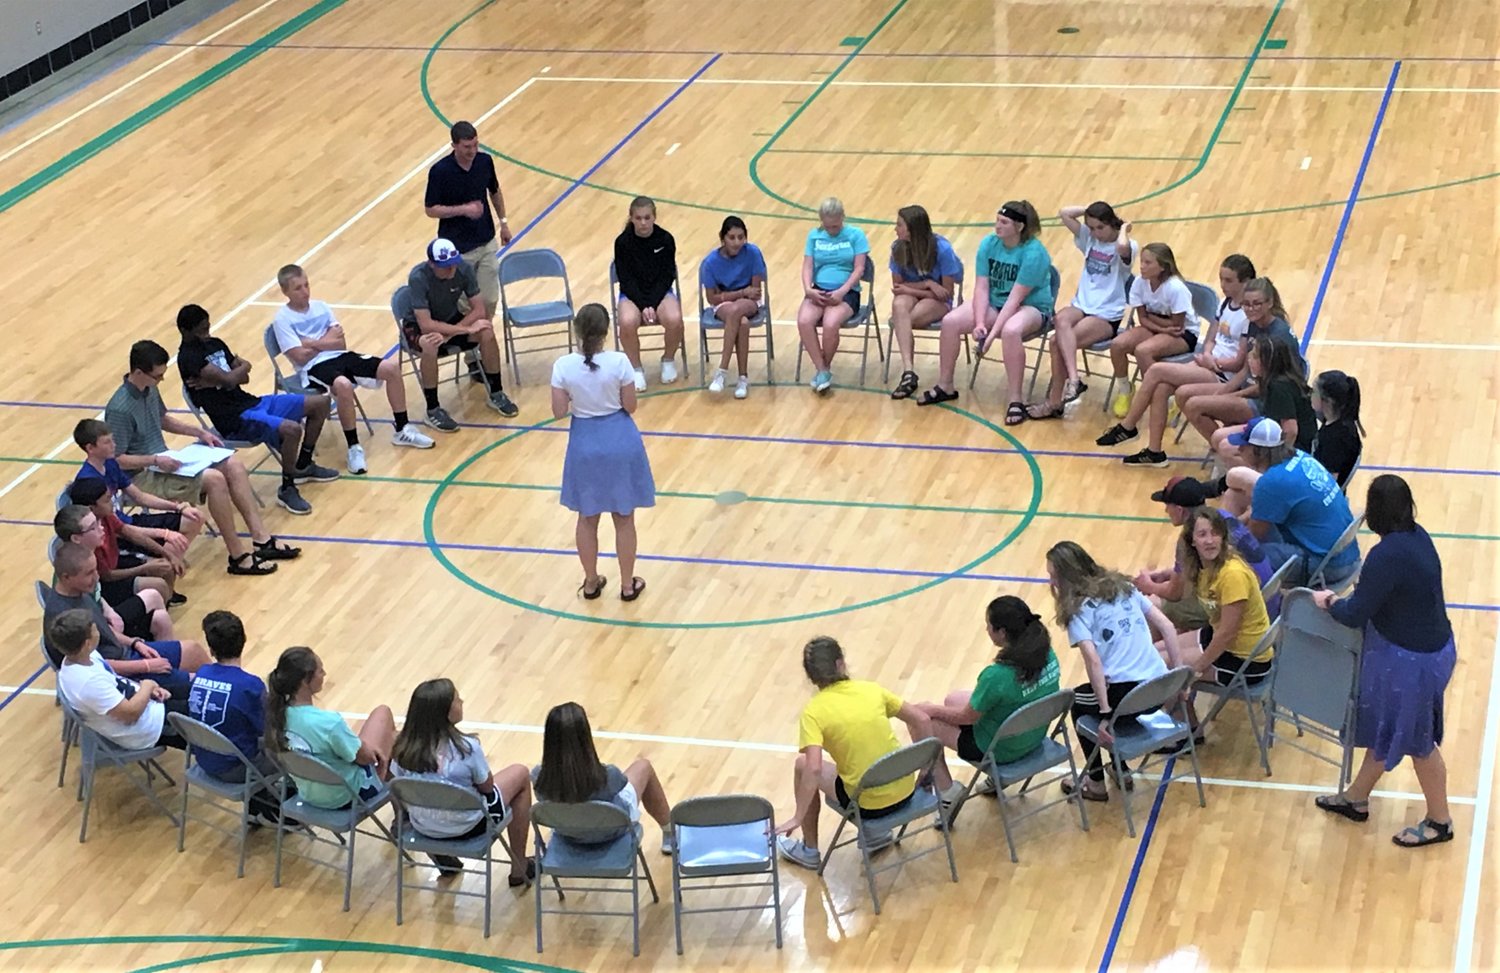 Teens of Ss. Peter & Paul in Boonville and surrounding parishes take part in a discussion during Totus Tuus, a weeklong, parish-based summer experience for Catholic youth.